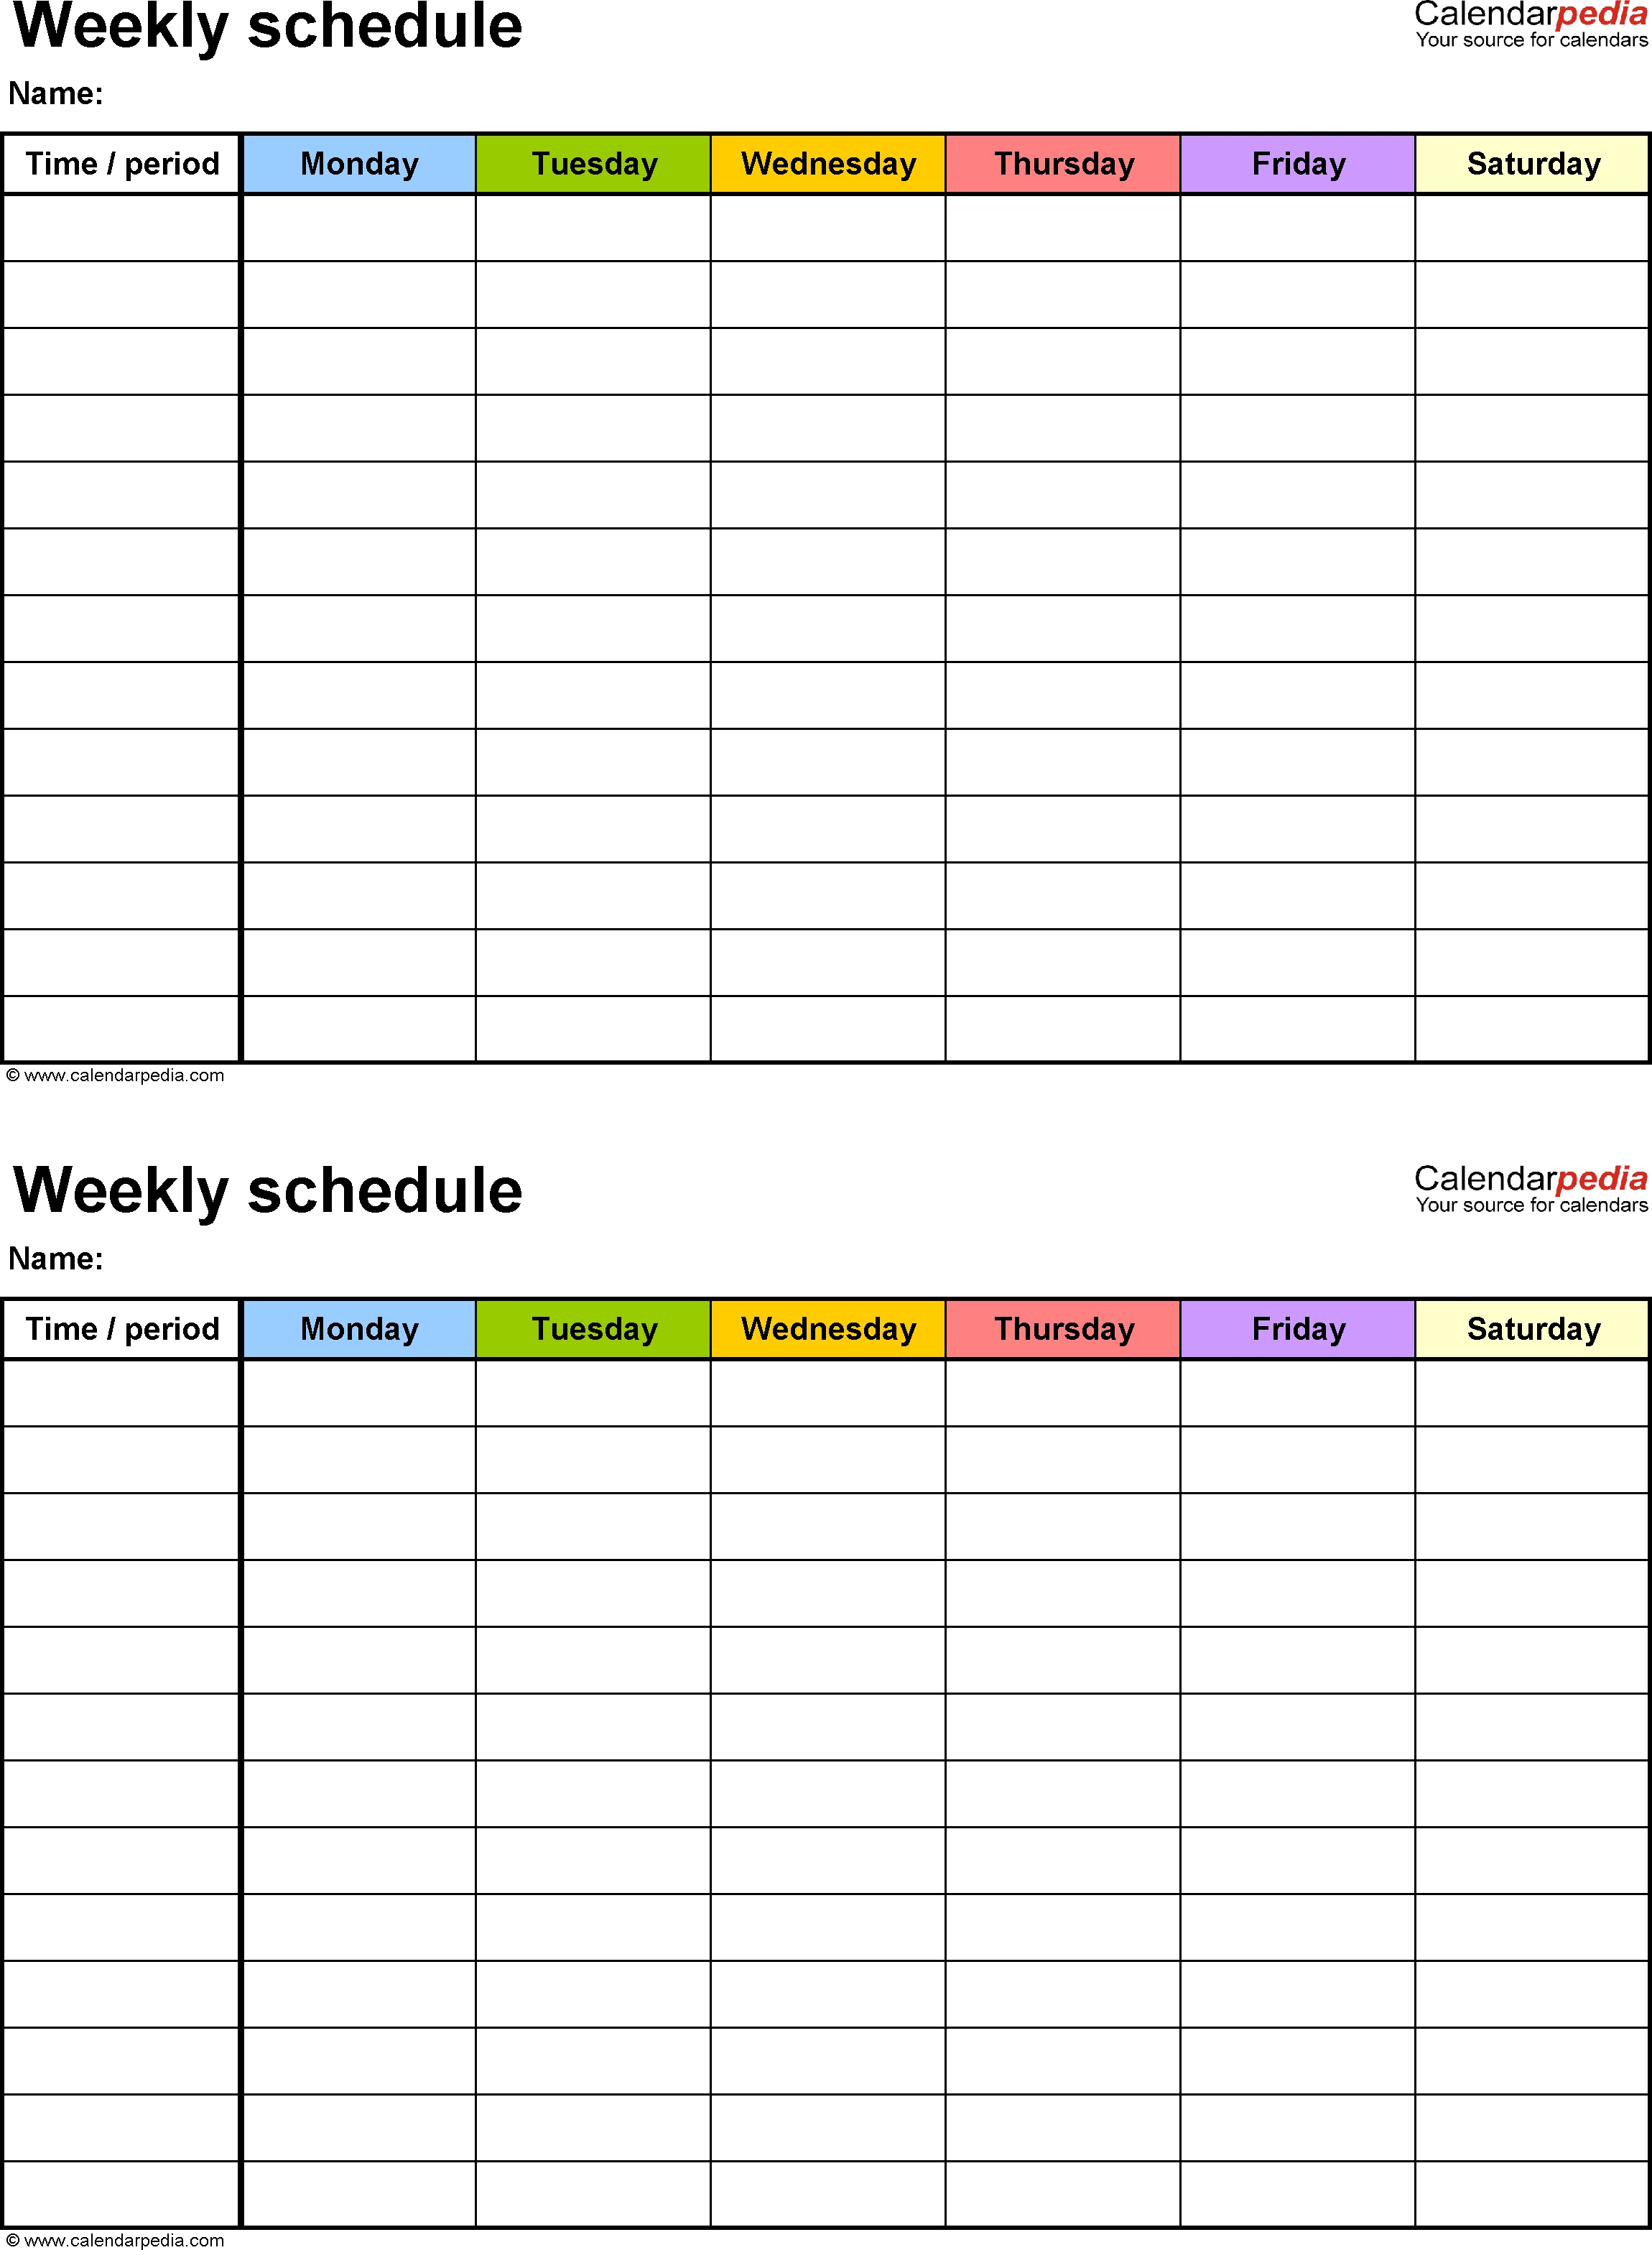 Free Weekly Schedule Templates For Word - 18 Templates in 7 Day A Week Calendar